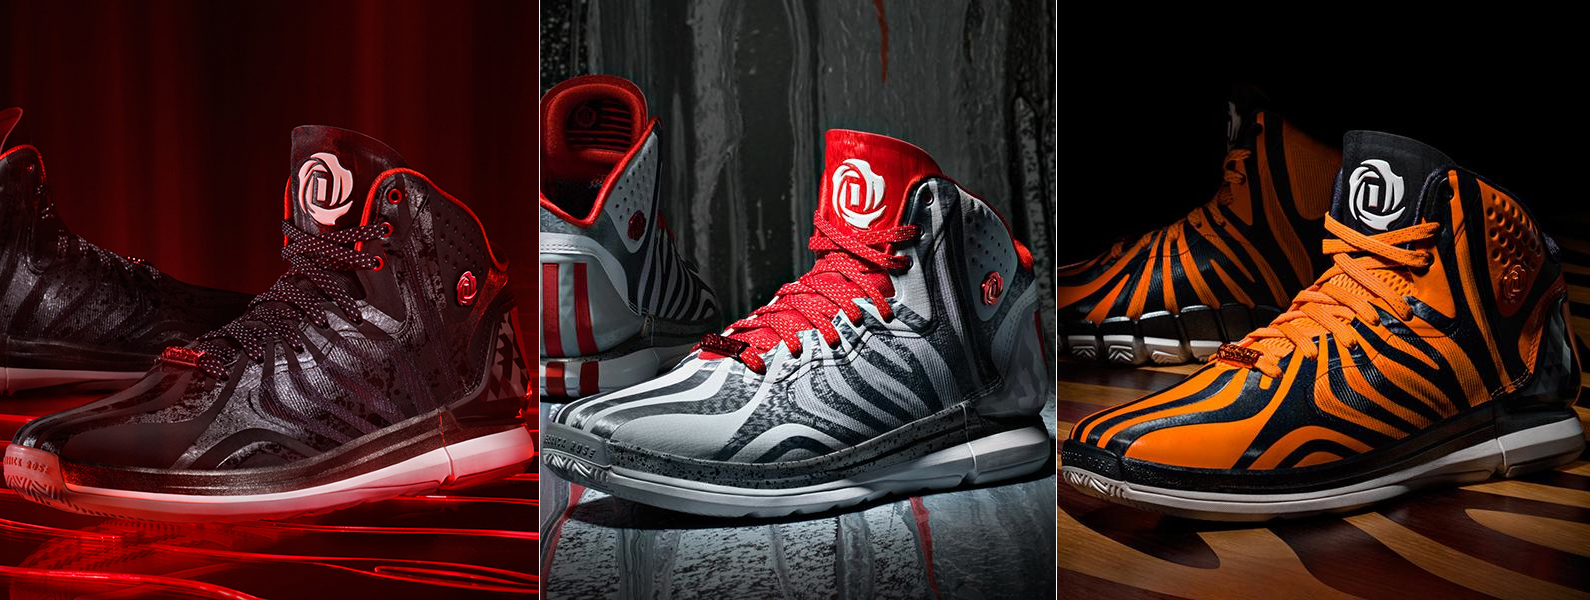 adidas d rose luxe